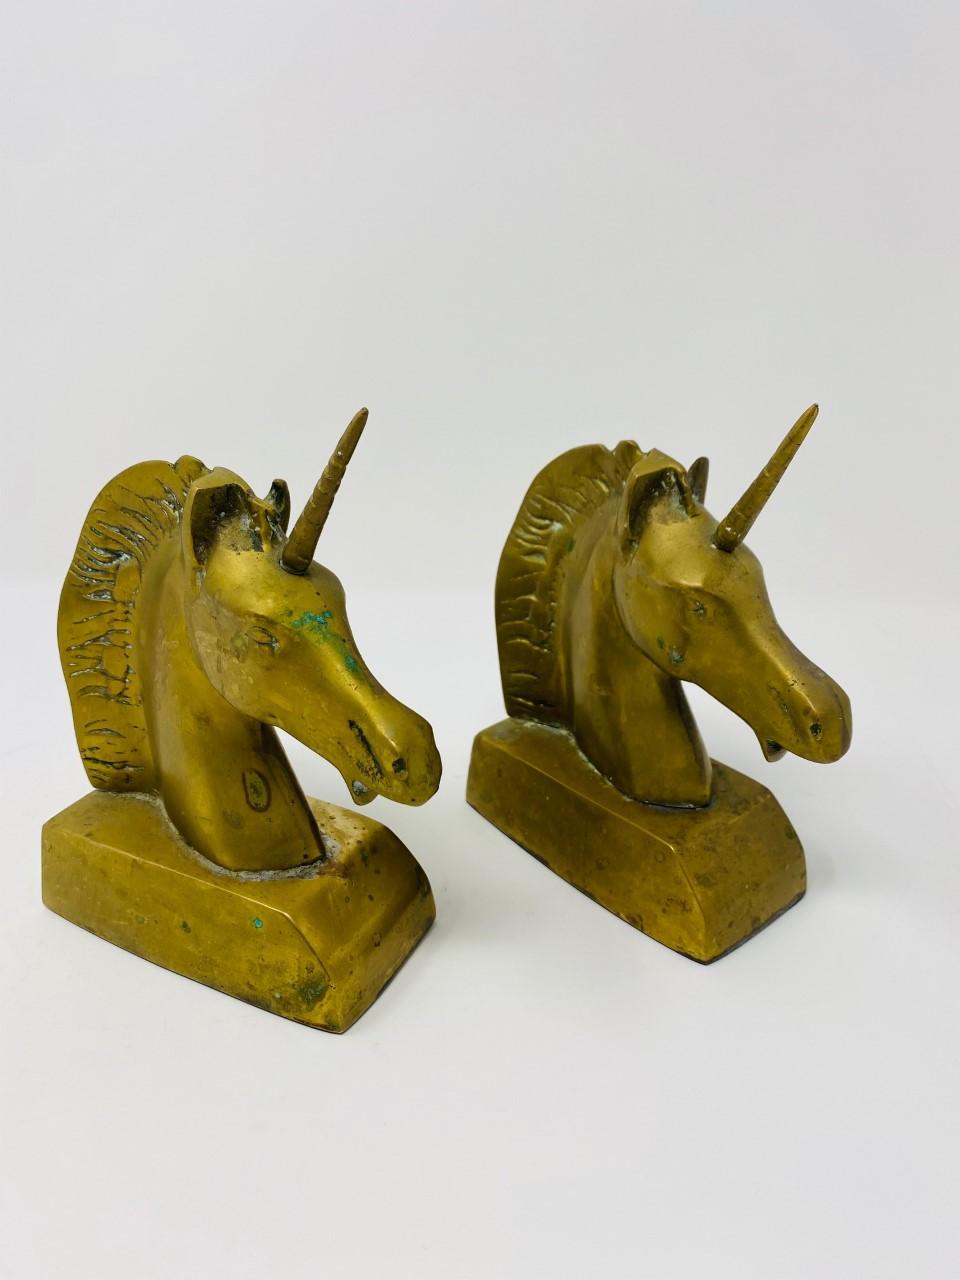 Hand-Crafted Vintage Rare Art Deco Brass Unicorn Sculpture Bookends